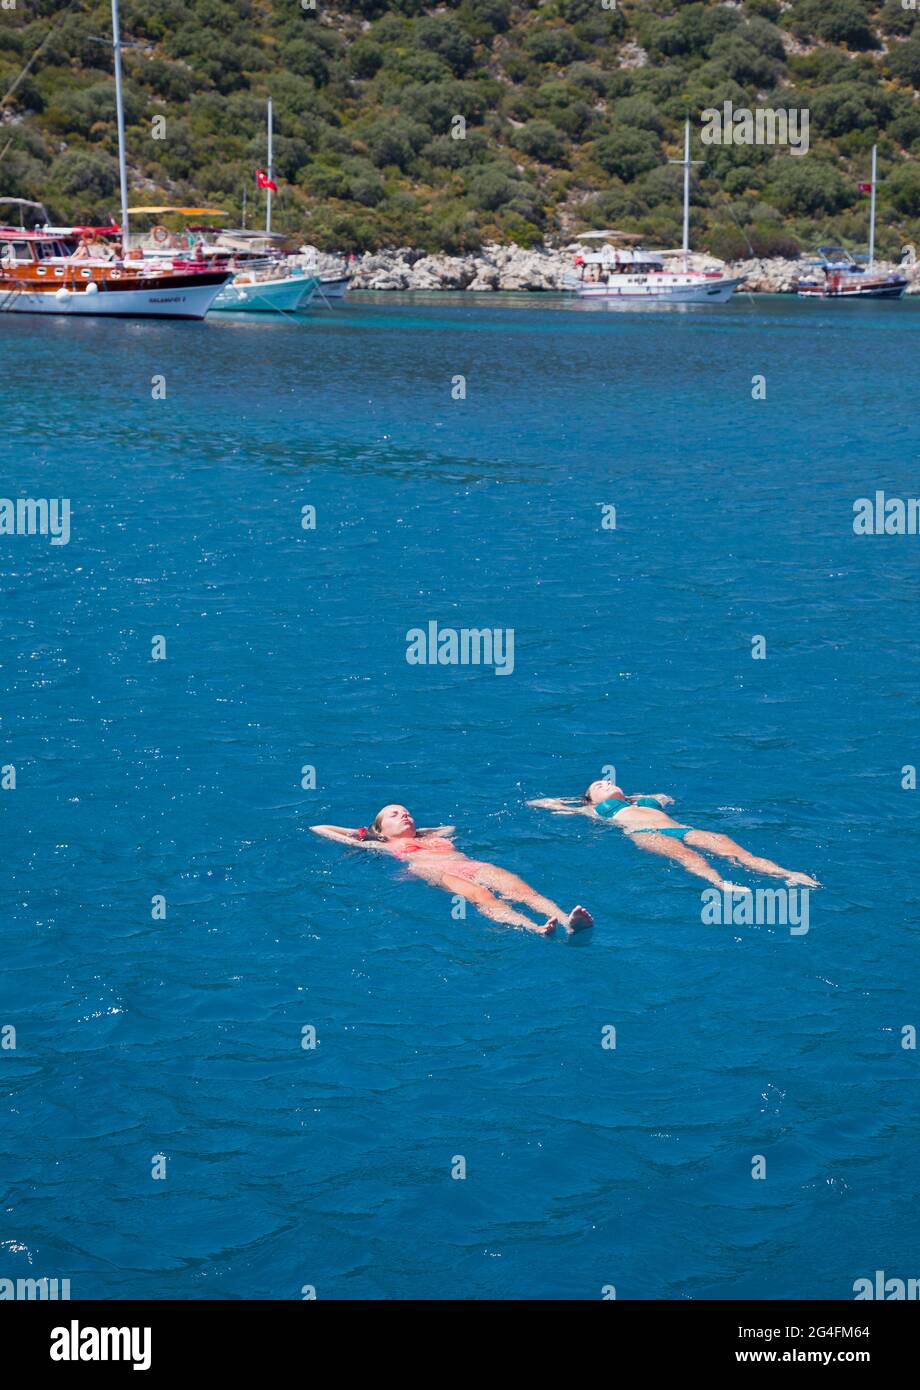 Kalkan, Turkey, 2020. two young ladies floating in the sea near to moored charter yachts in a sheltered part of Kalkan bay in Turkey;  located on the Stock Photo